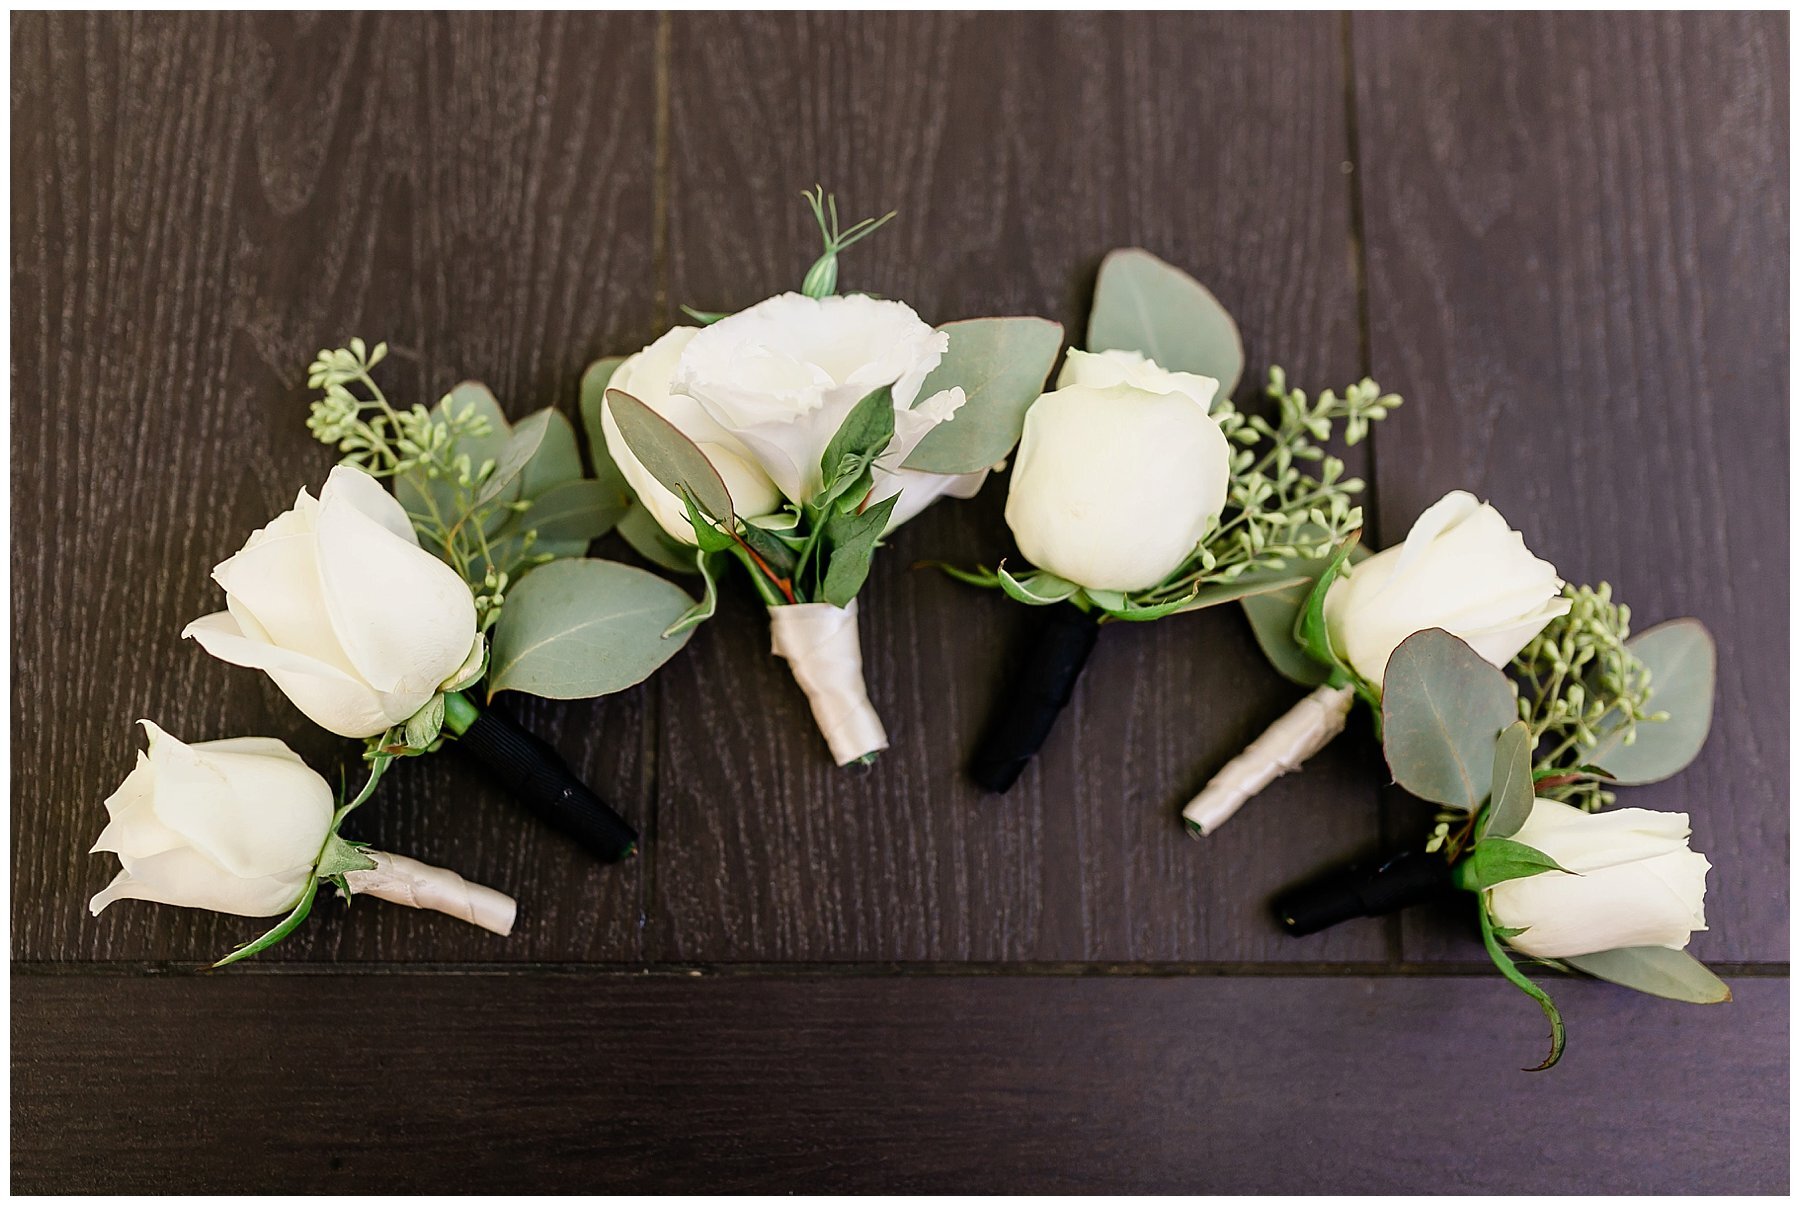  boutonnières laid out on the table  